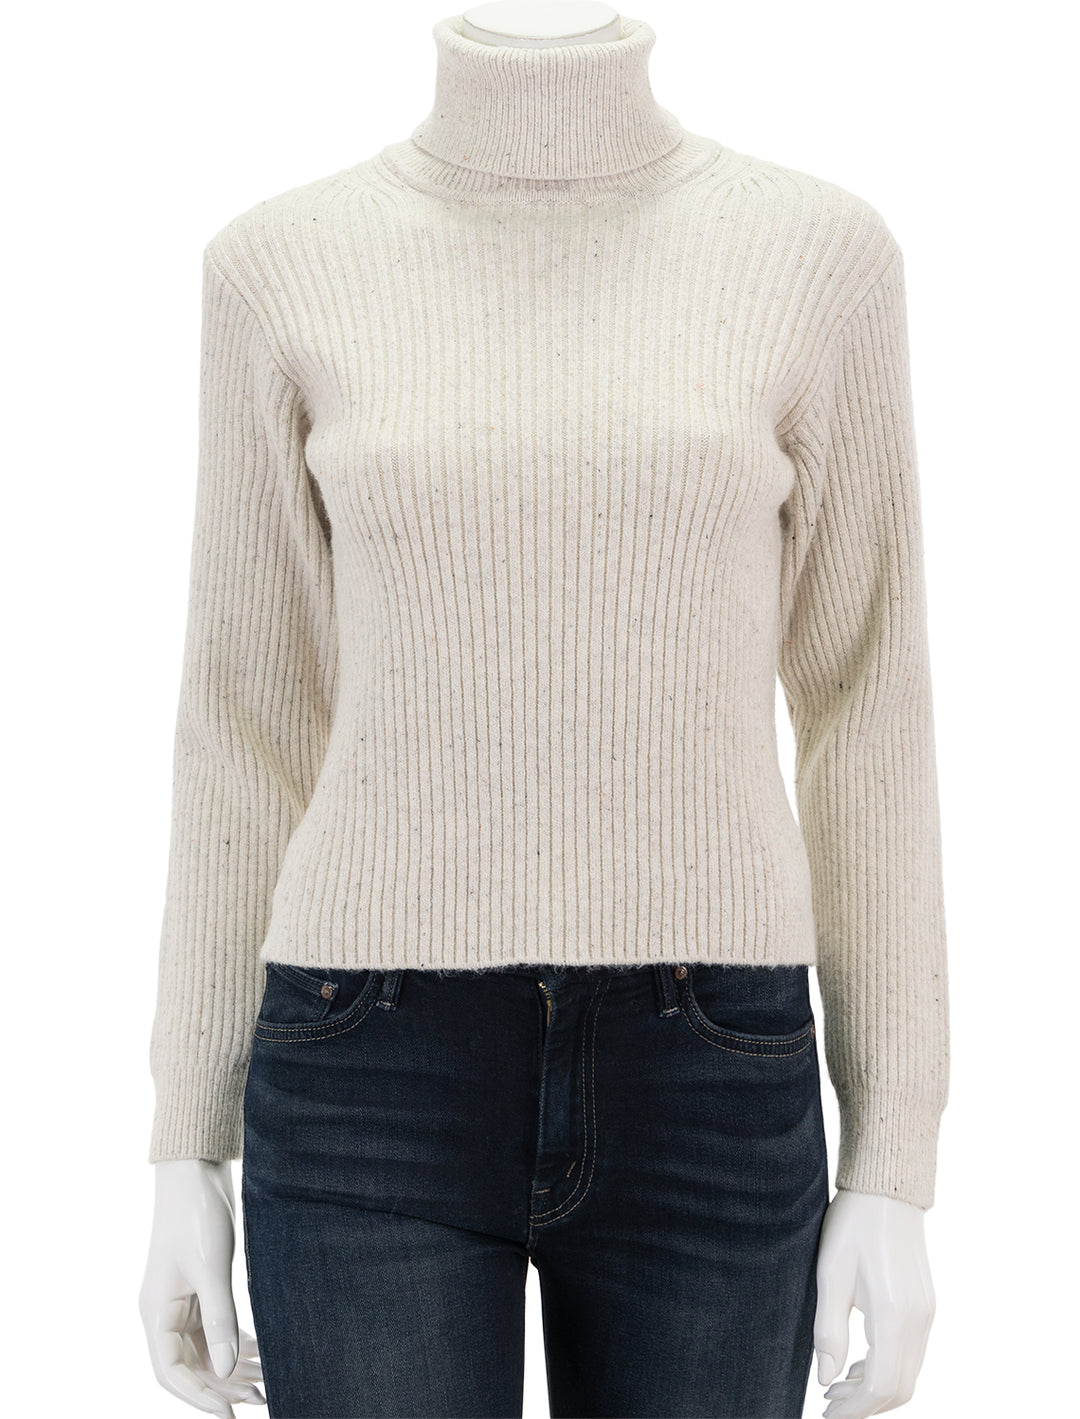 Front view of Marine Layer's isla knit turtleneck in oatmeal.